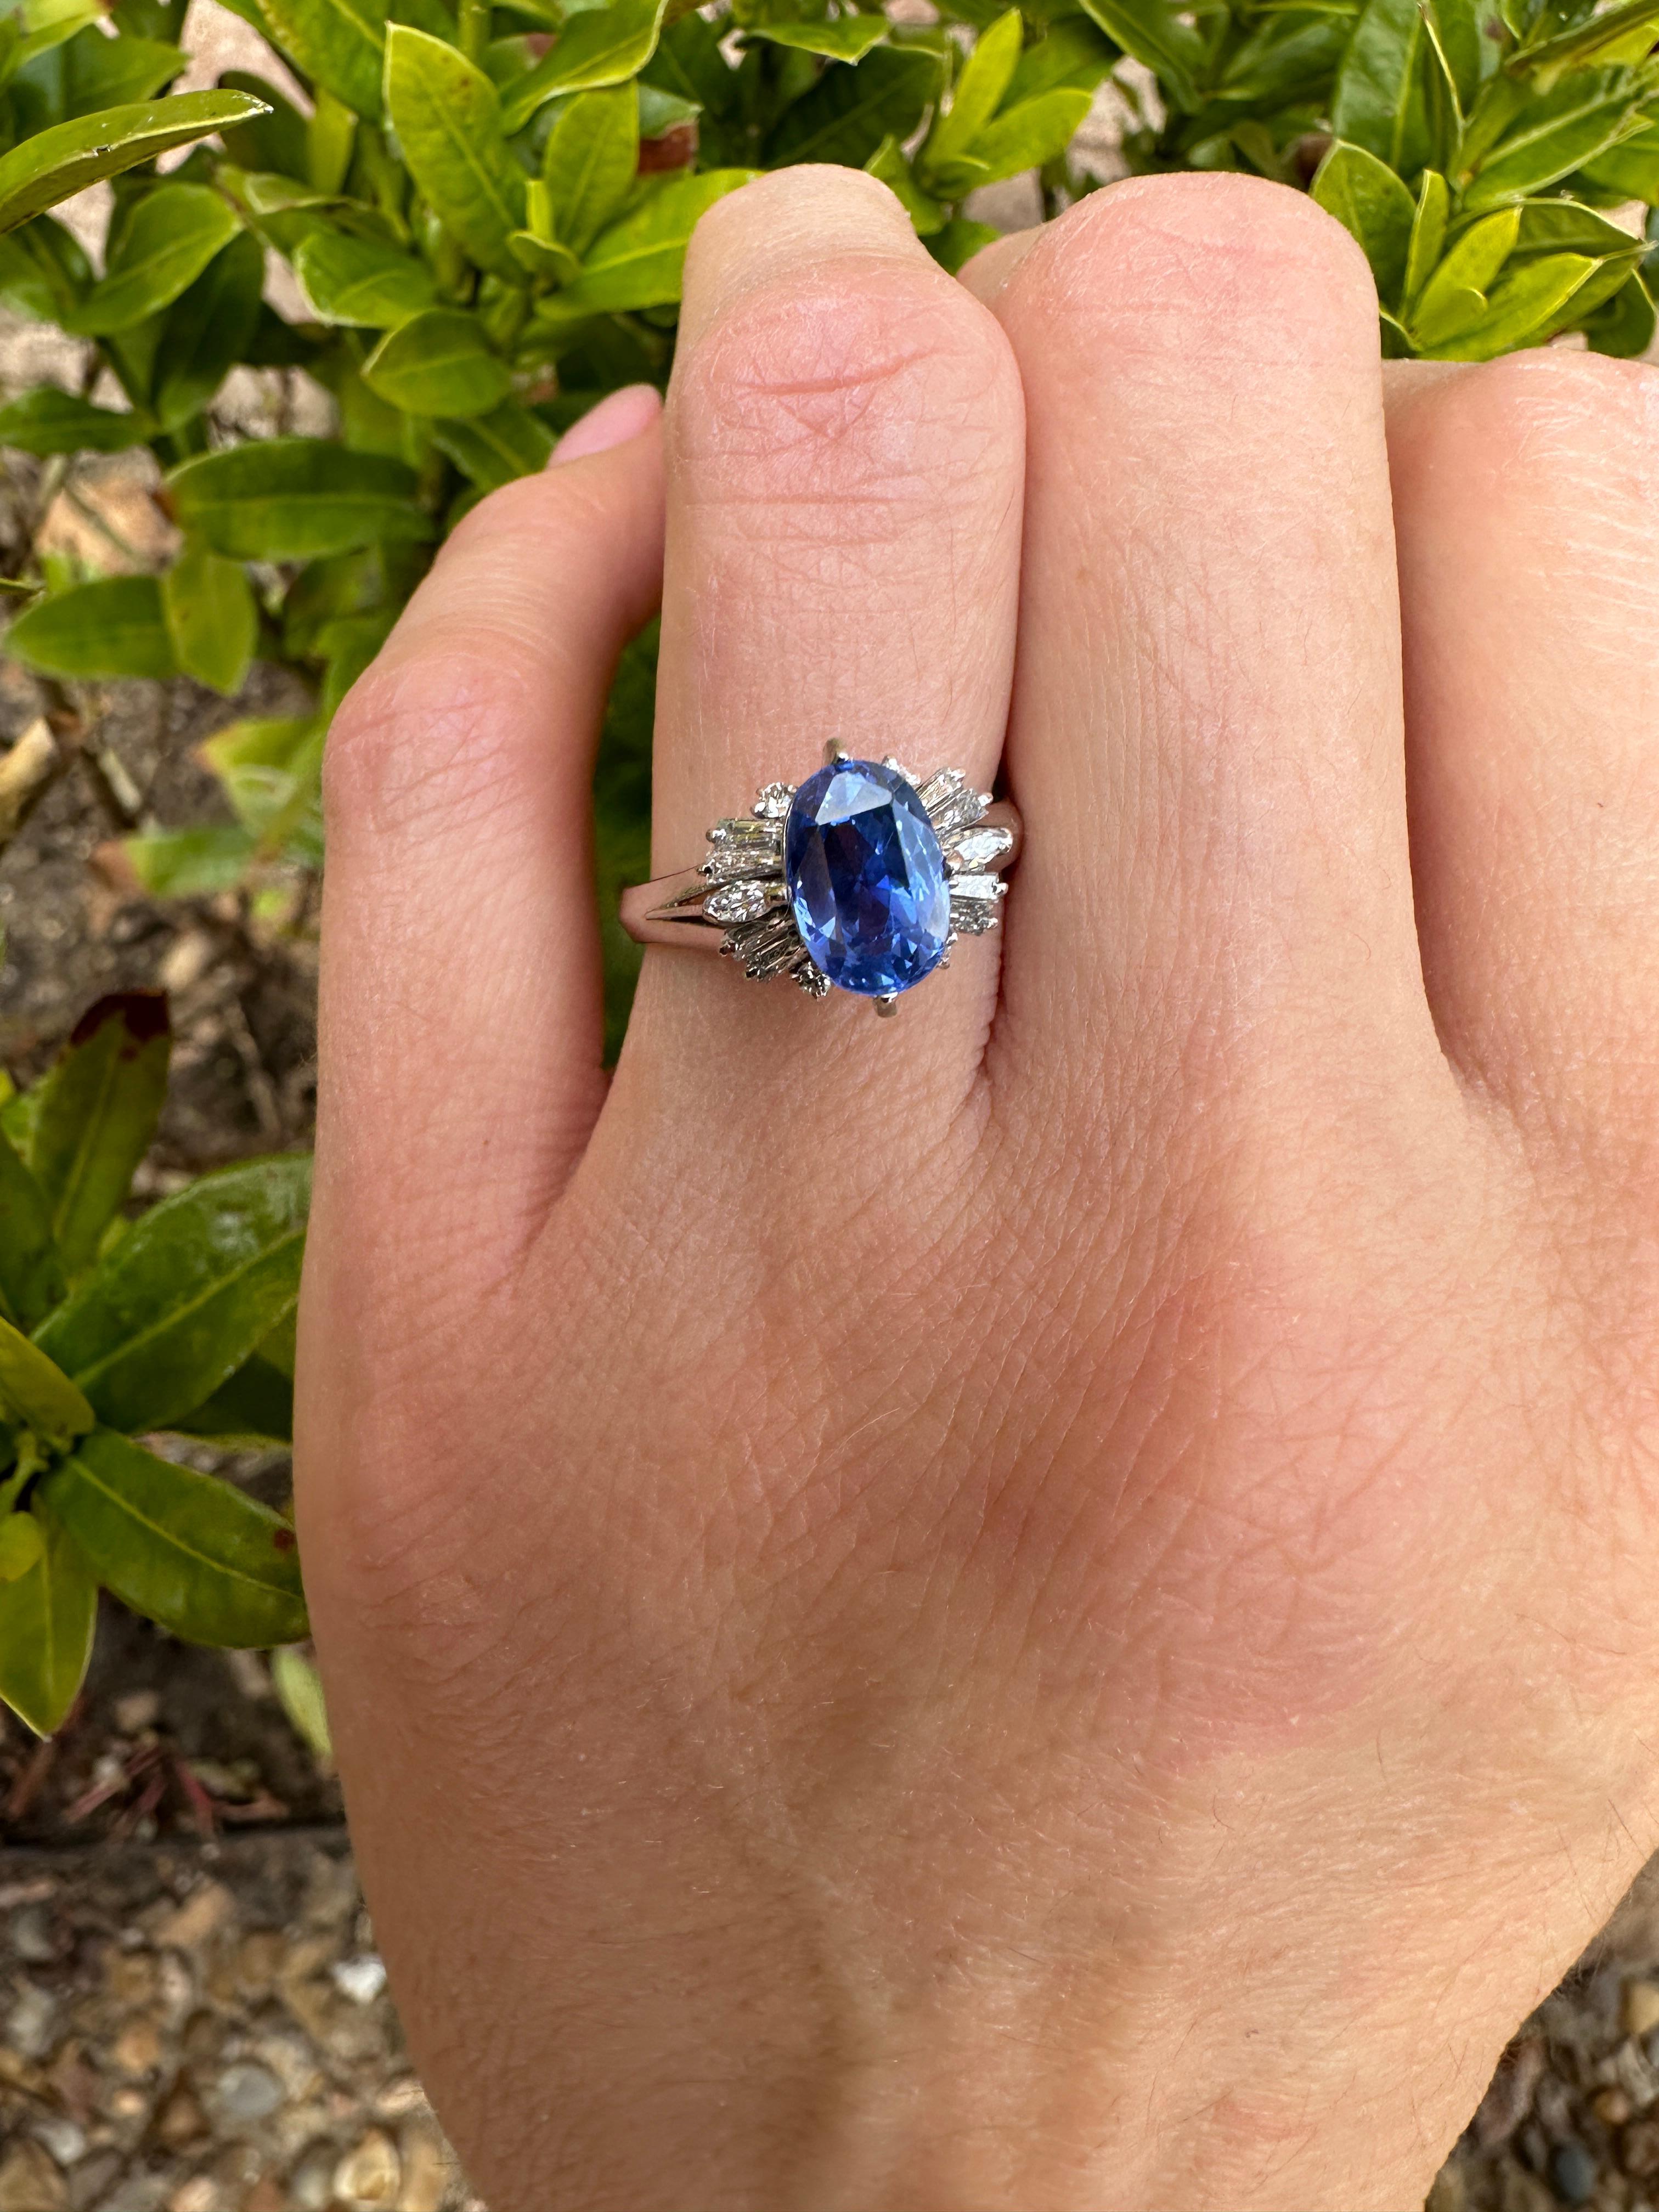 These Ceylon no heat Sapphires are getting more and more rare by the day.
Vivid blue color oval shape sapphire with side diamonds on a platinum vintage ring, you can't ask more than that for an alternative engagement ring or an anniversary